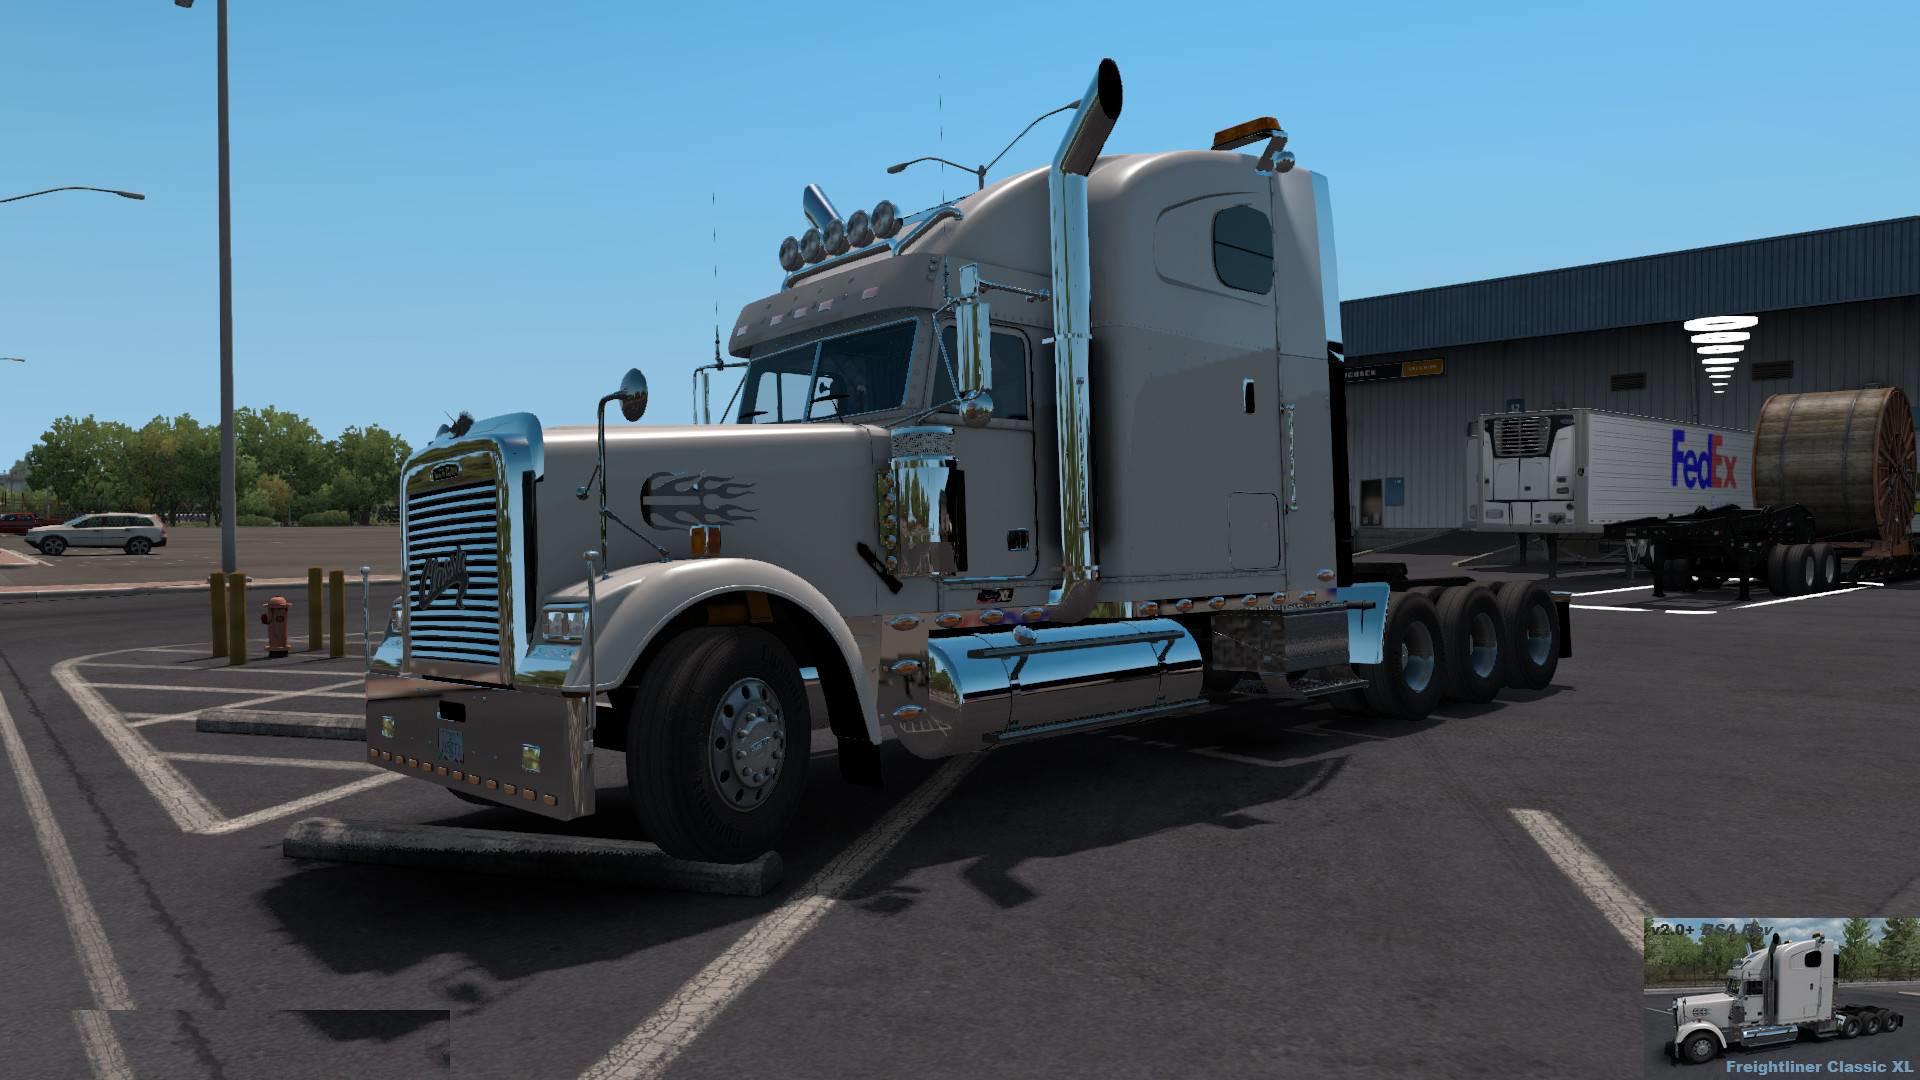 Атс 0. ATS freightliner Classic XL. Freightliner Classic XL ATS 1.46. Freightliner Classic ATS. Грузовик freightliner Classic XL.